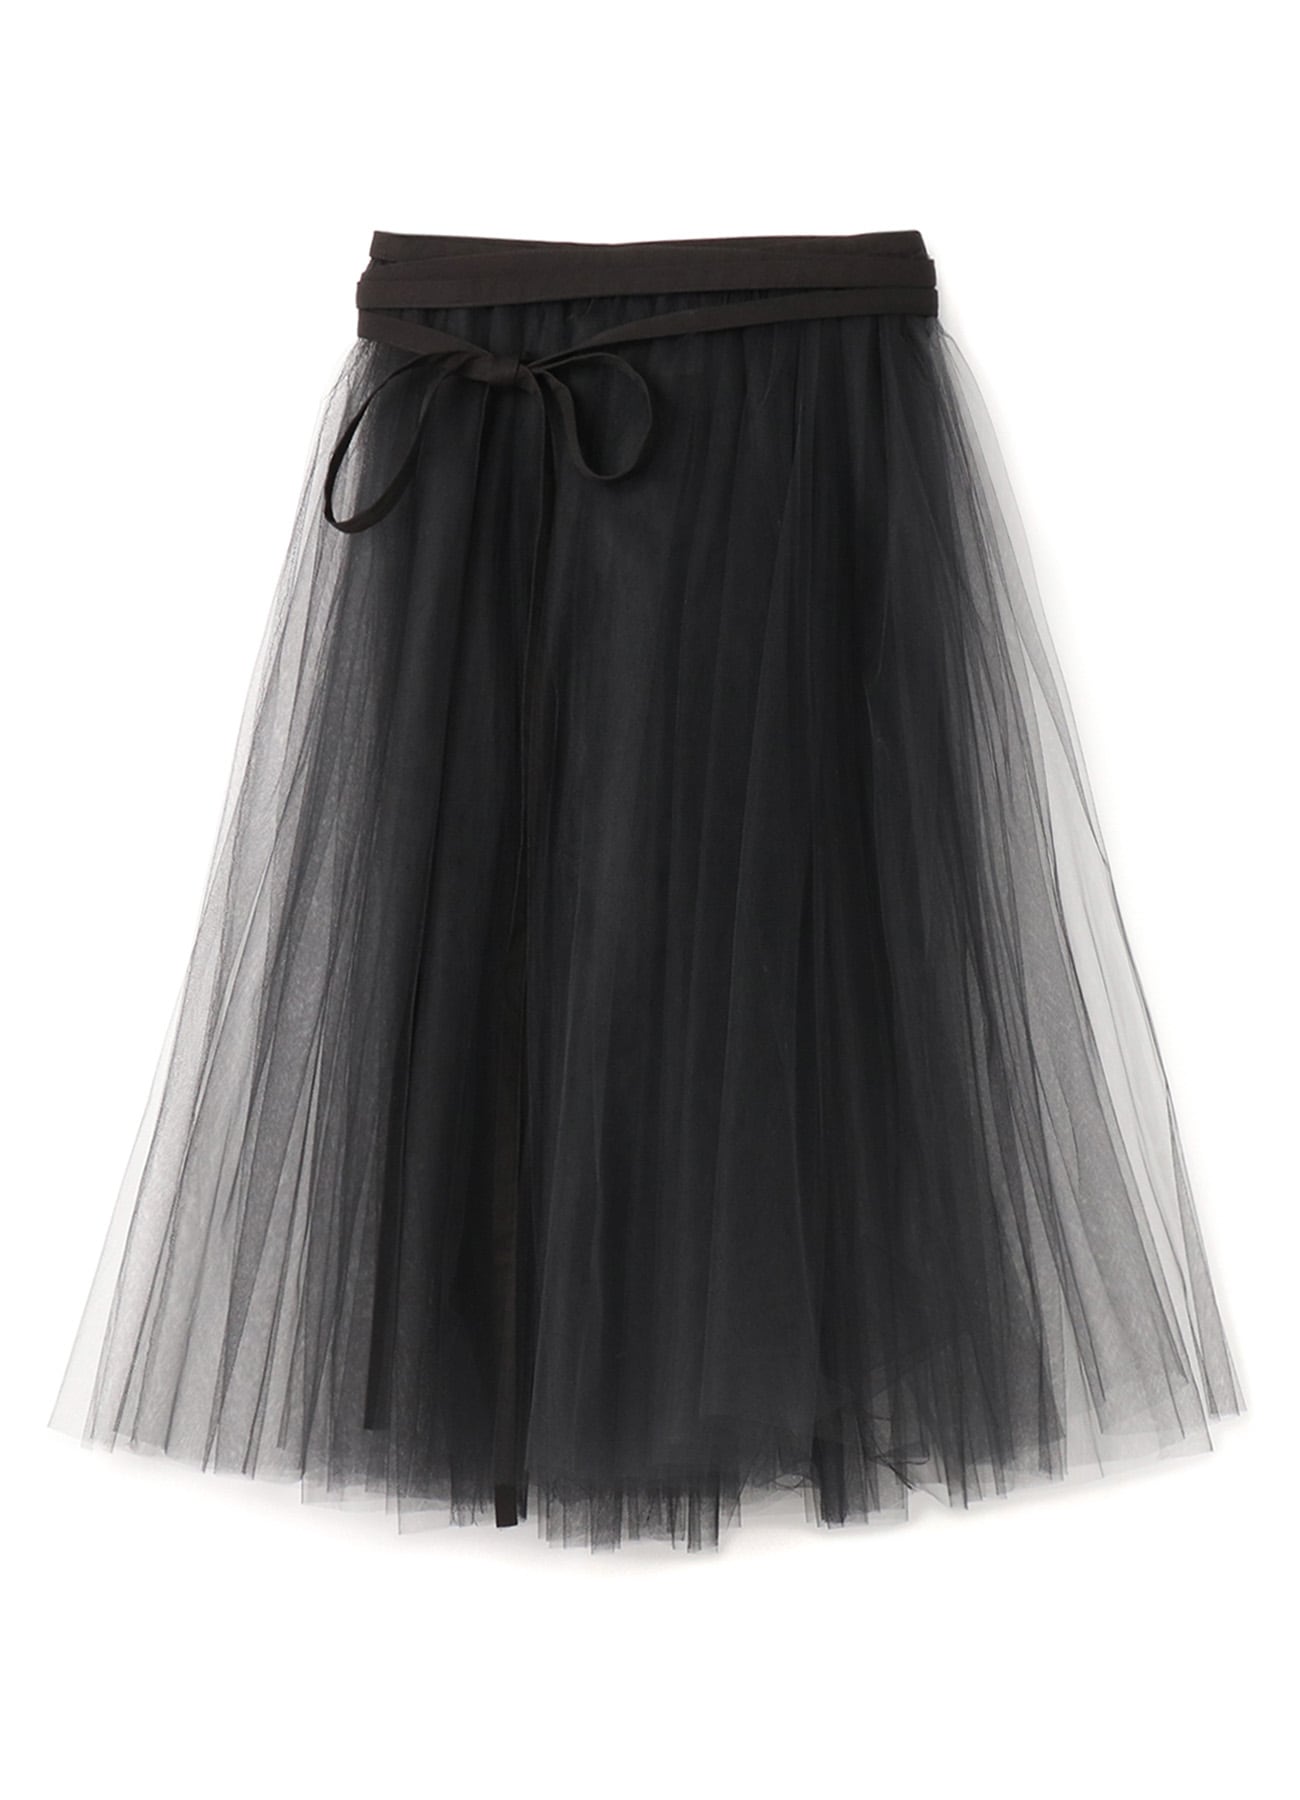 [LIMI feu 20th Anniv. Collection]Ny/Tulle Wrap Skirt